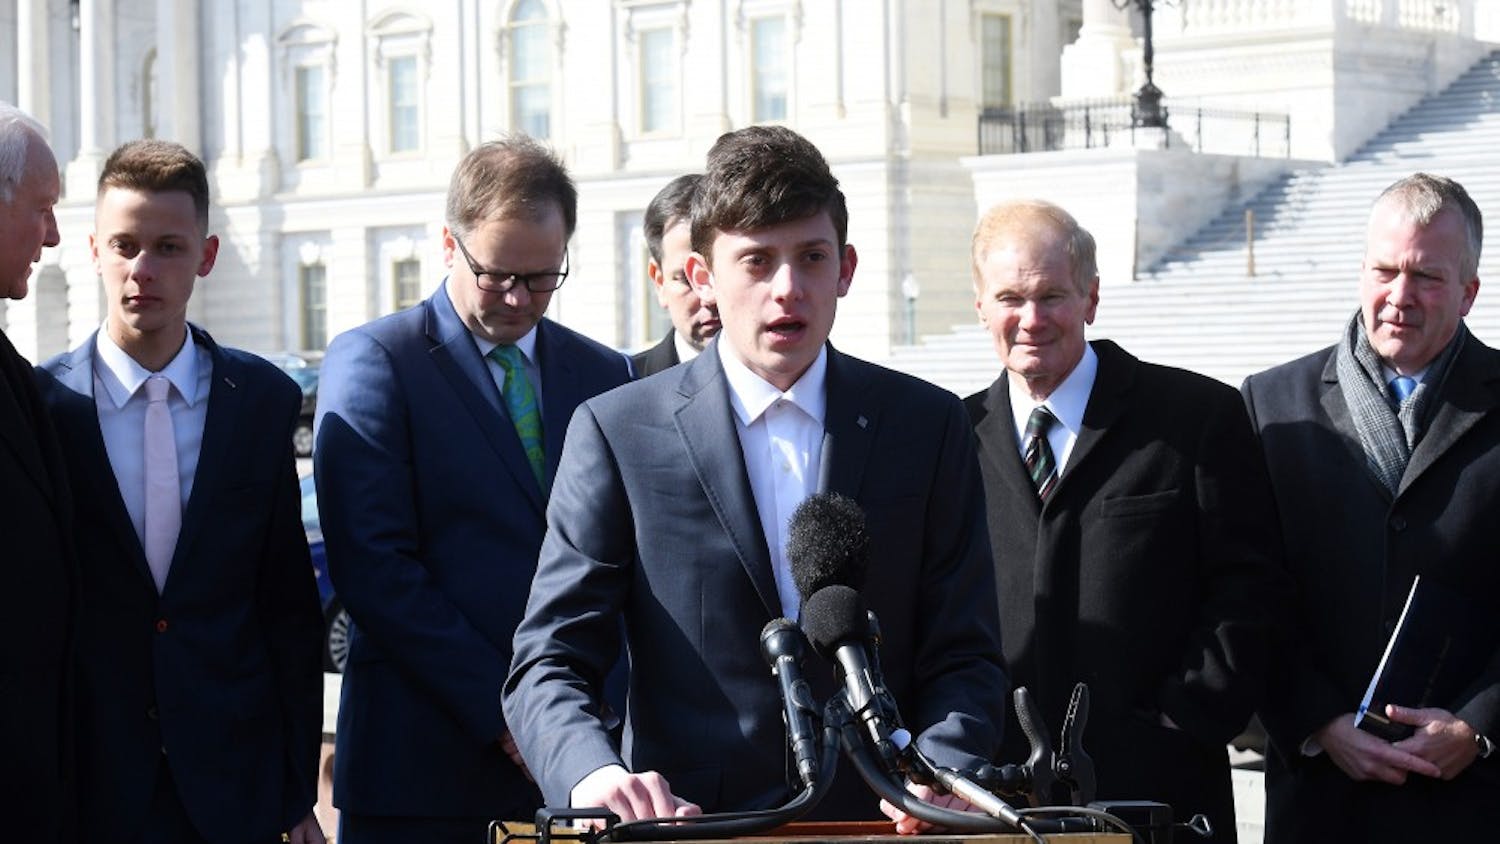 Kyle Kashuv, who survived the shooting at Stoneman Douglas last month, joins Florida Sens. Marco Rubio and Bill Nelson during a press conference to call for swift passage of a bill to address school violence Tuesday, March 13, 2018 on Capitol Hill in Washington, D.C. (Olivier Douliery/Abaca Press/TNS) 